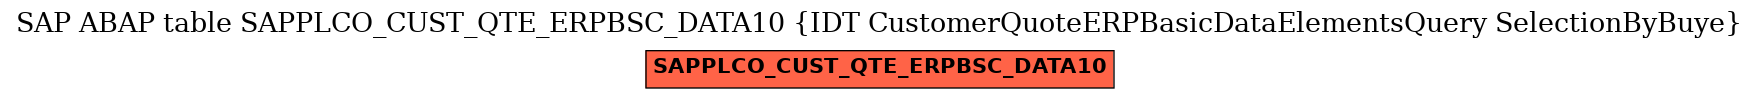 E-R Diagram for table SAPPLCO_CUST_QTE_ERPBSC_DATA10 (IDT CustomerQuoteERPBasicDataElementsQuery SelectionByBuye)